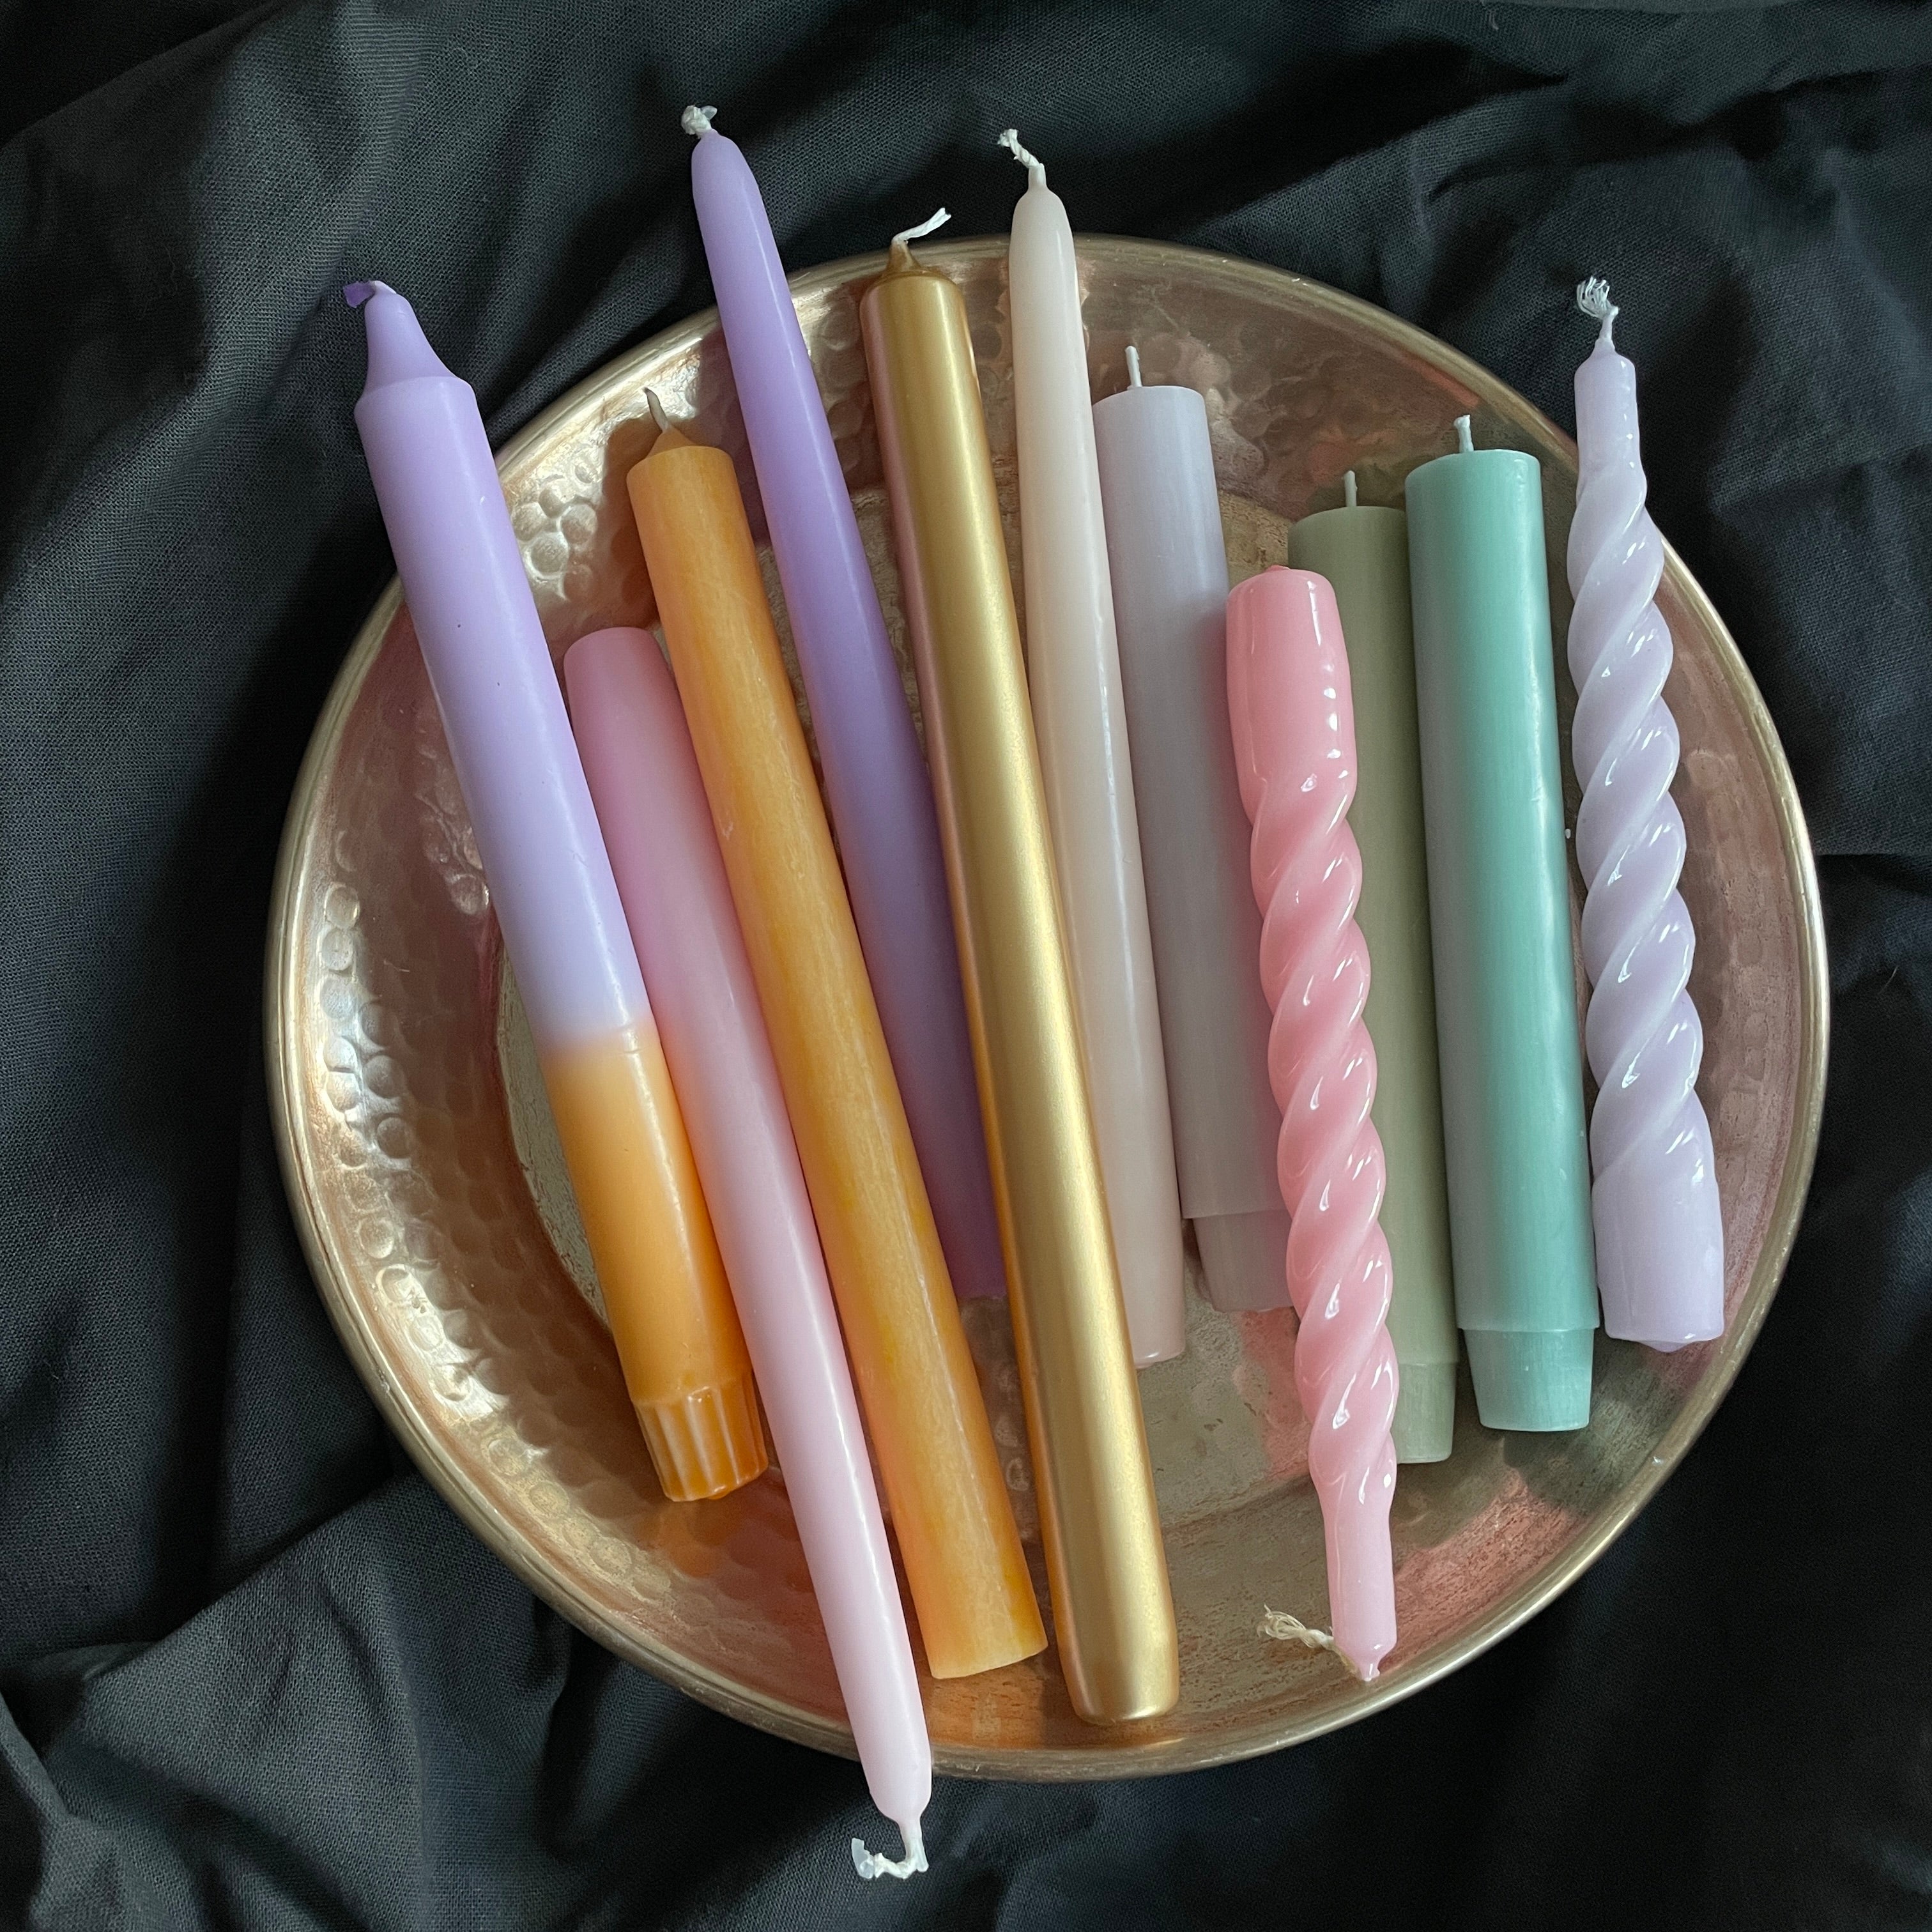 The Candle Club set Pretty Pastels